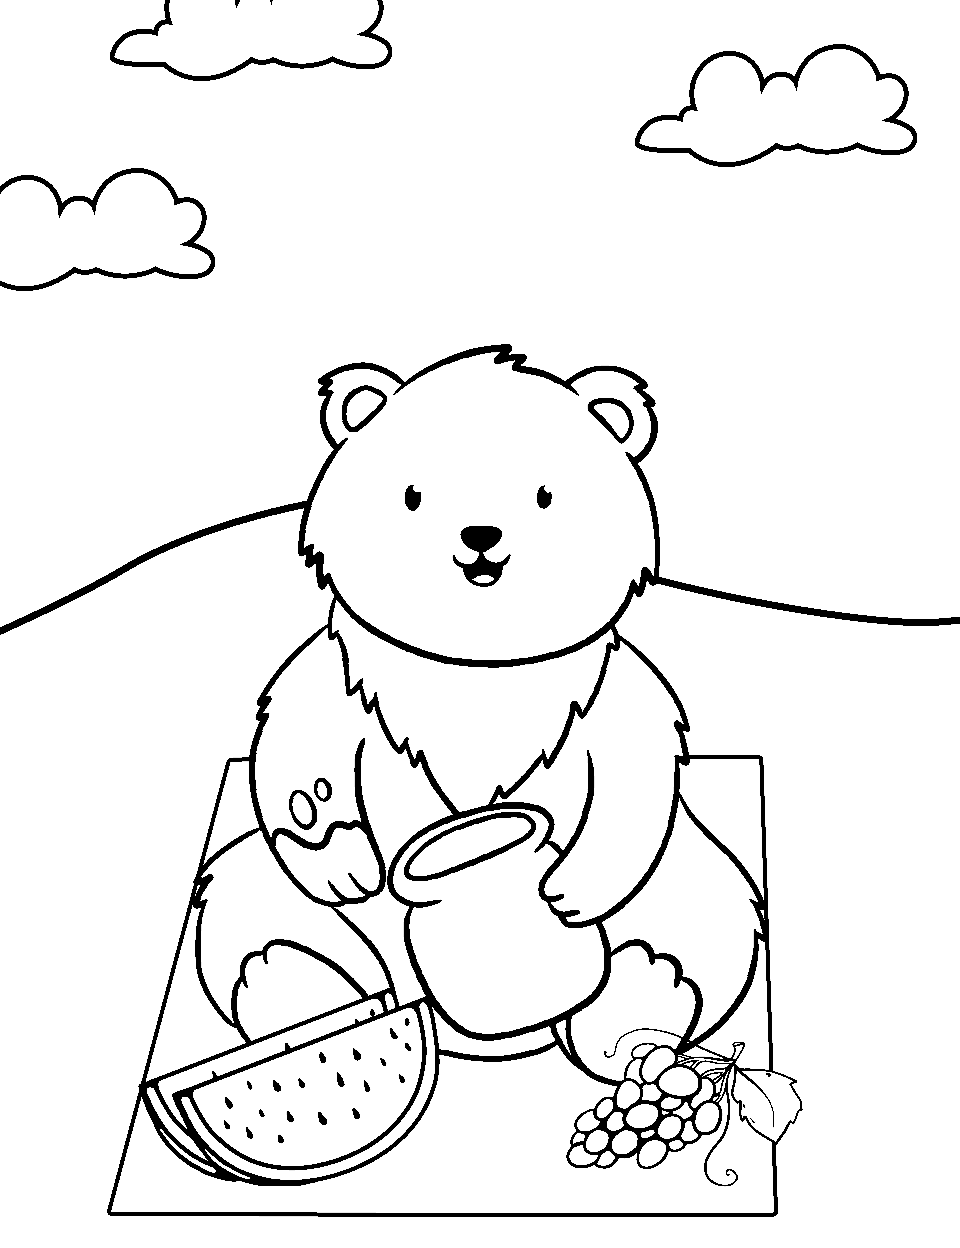 30 Bear Coloring Pages: Free Printable Sheets